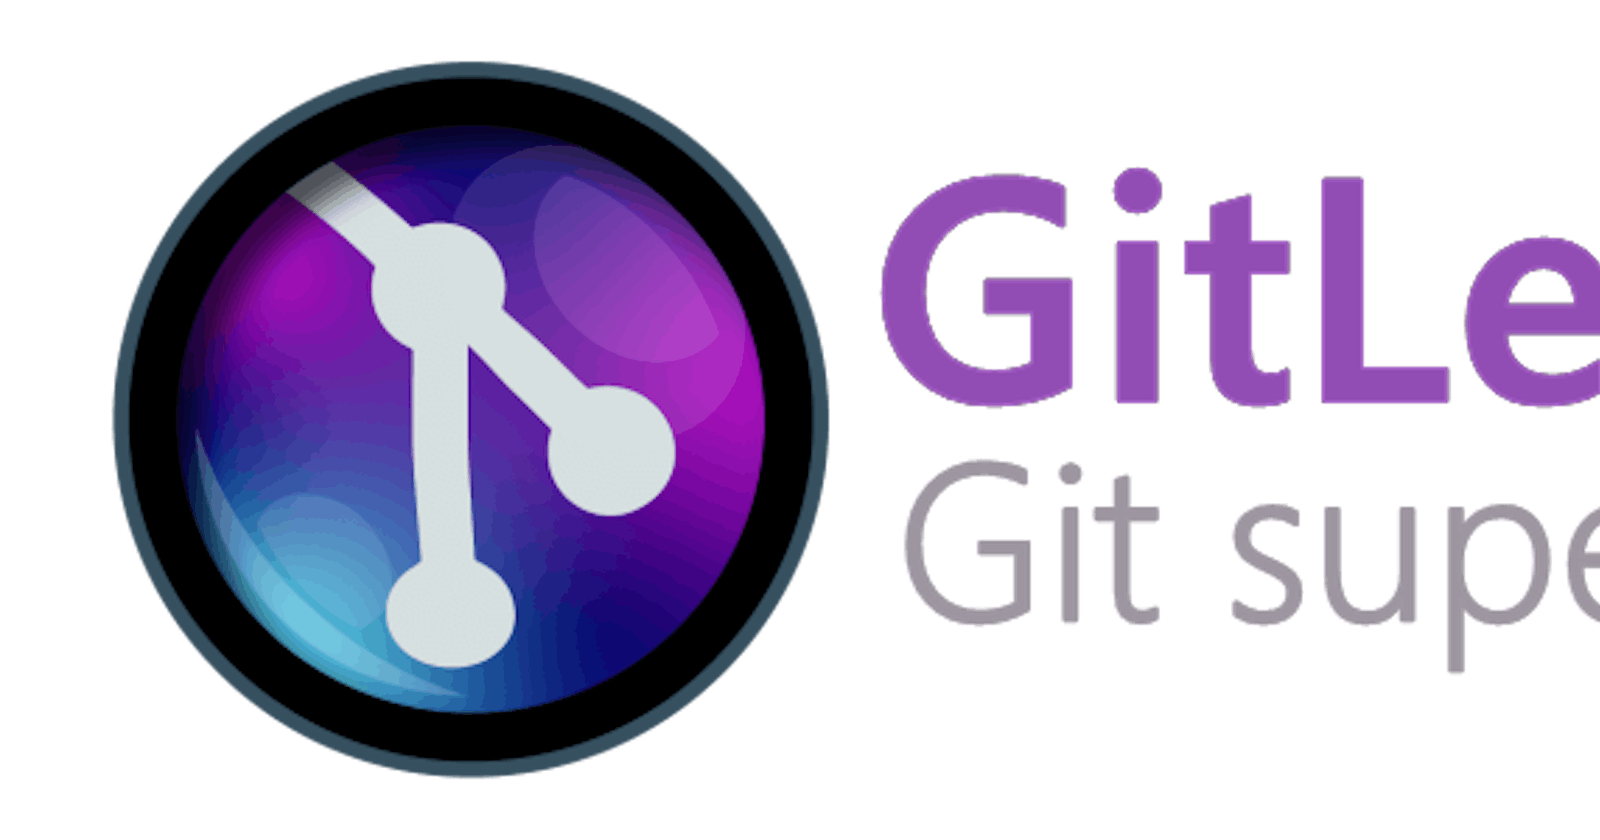 What happened to GitLens?